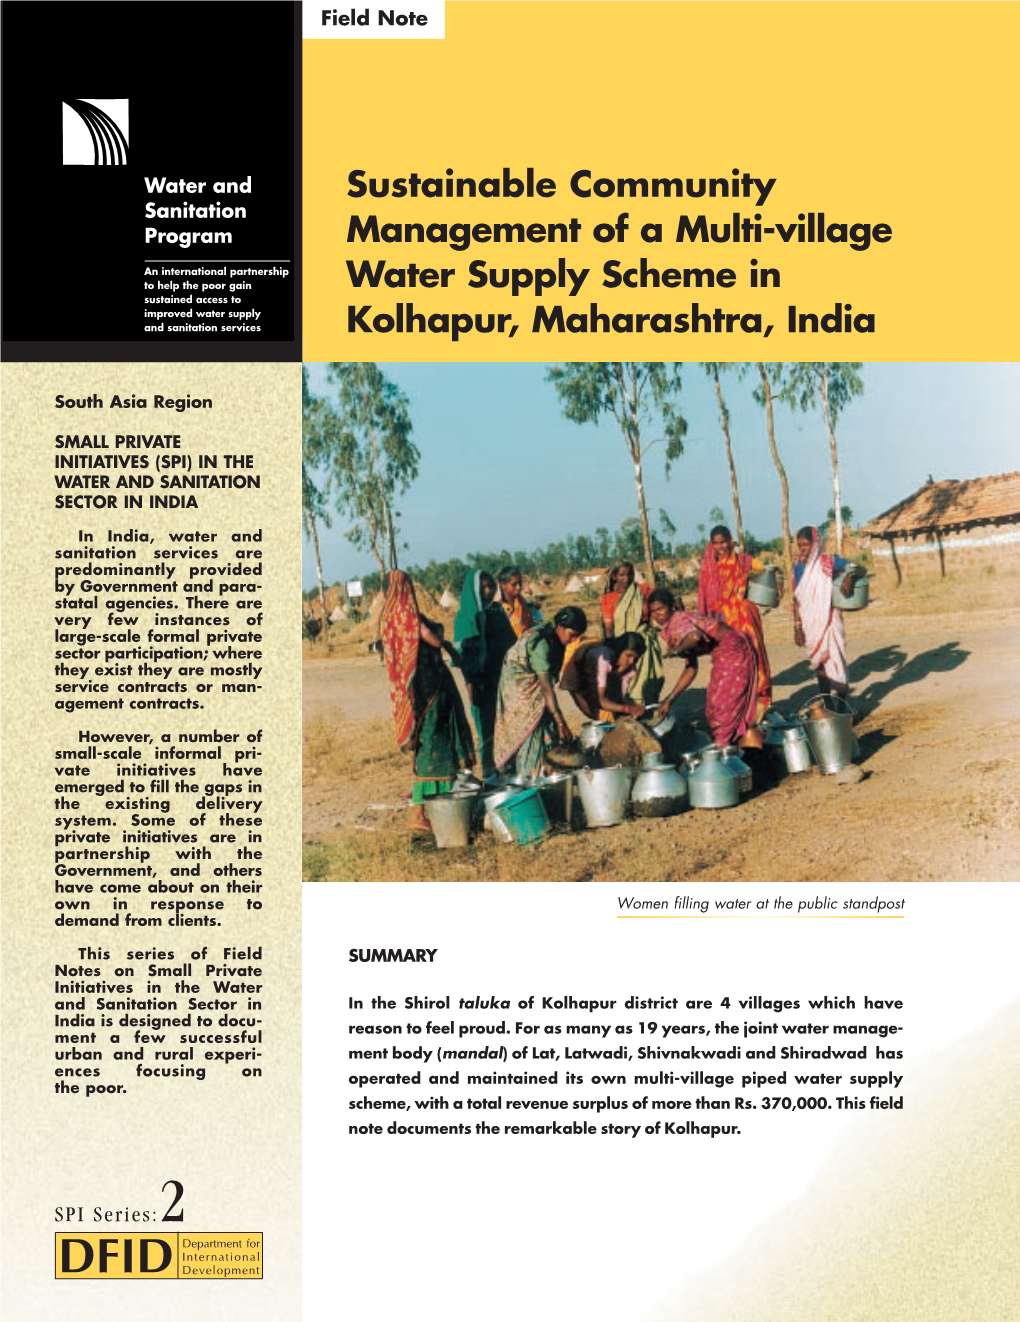 Sustainable Community Management of a Multi-Village Water Supply